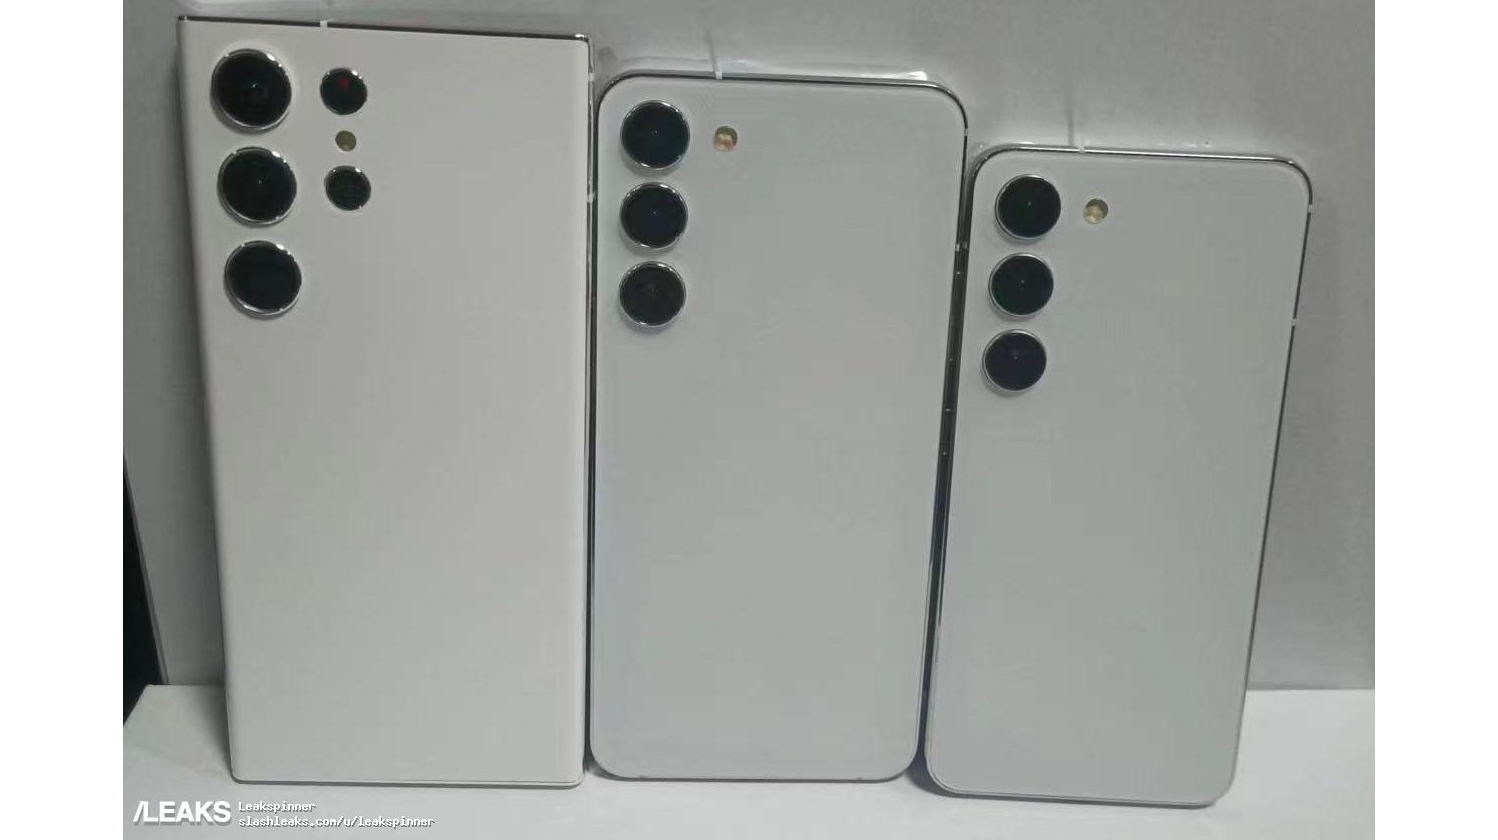 Dummy units of the Galaxy S23 series have leaked